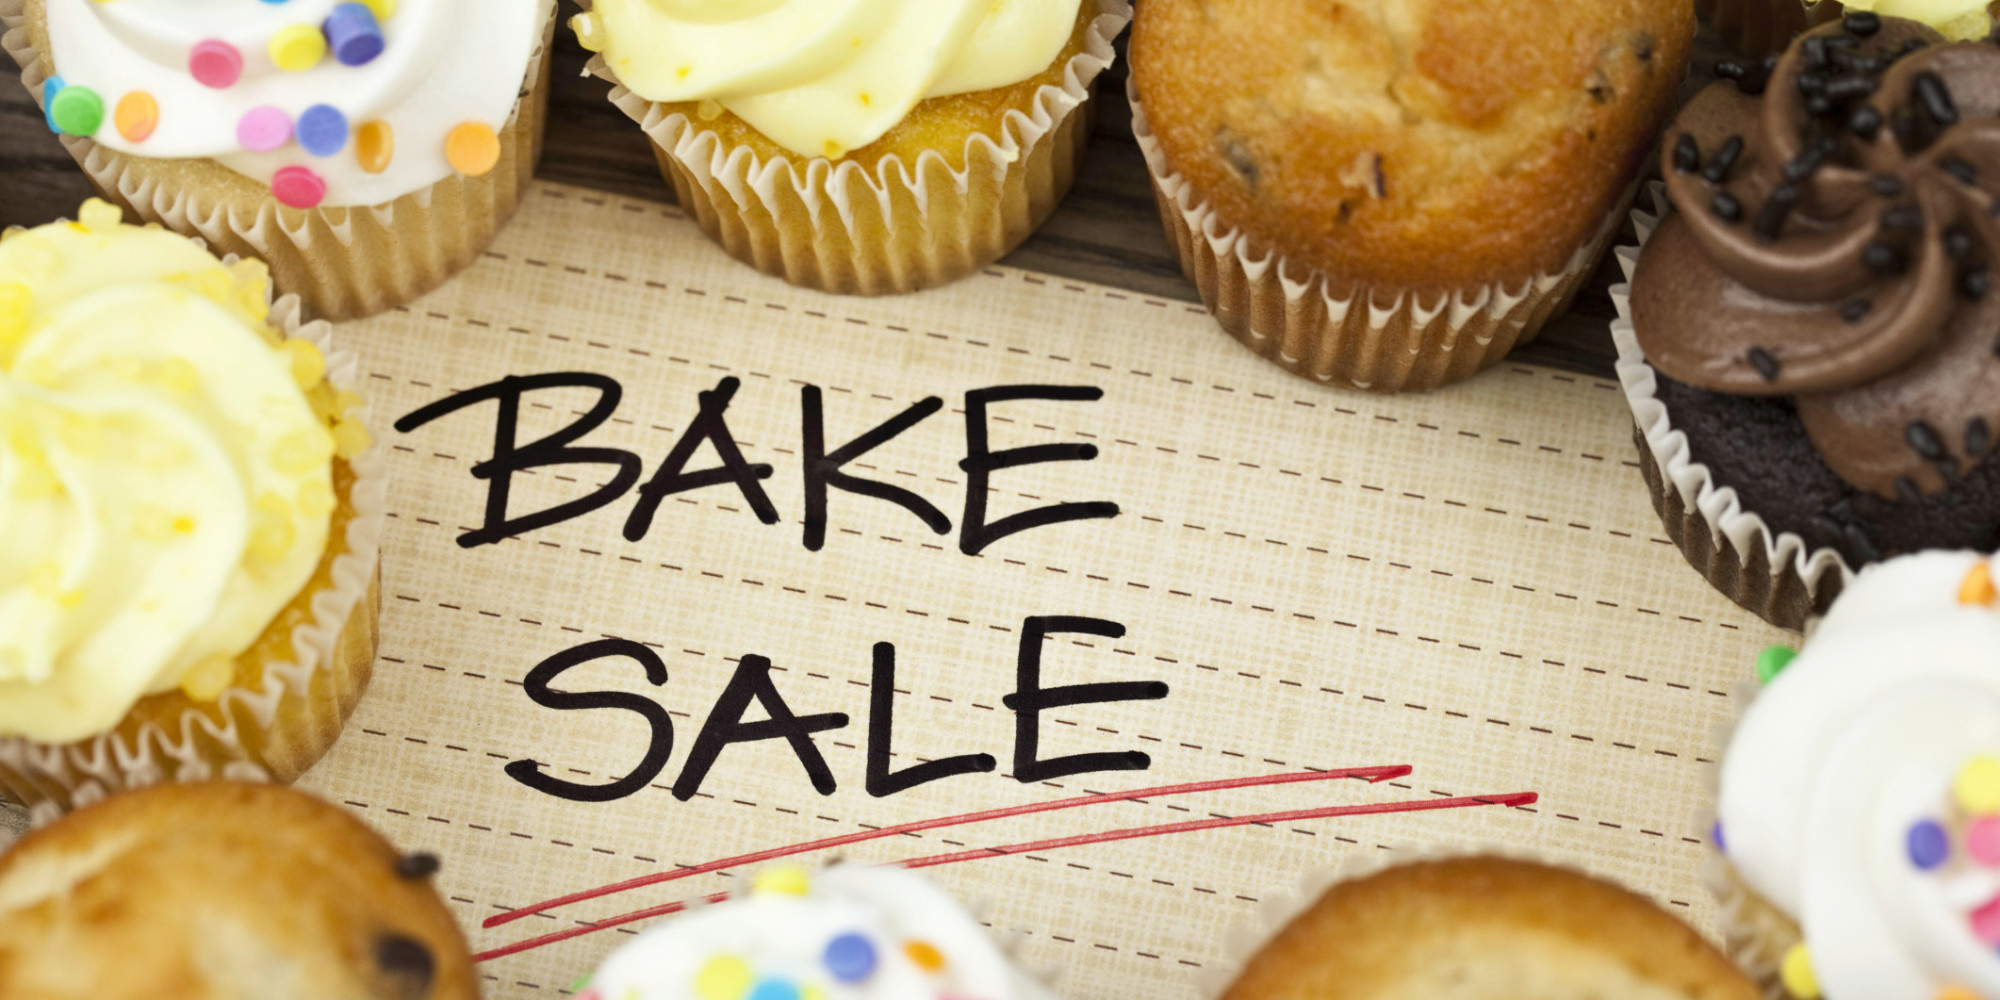 The Best And Worst Bake Sale Goods, In (Totally Subjective) Order